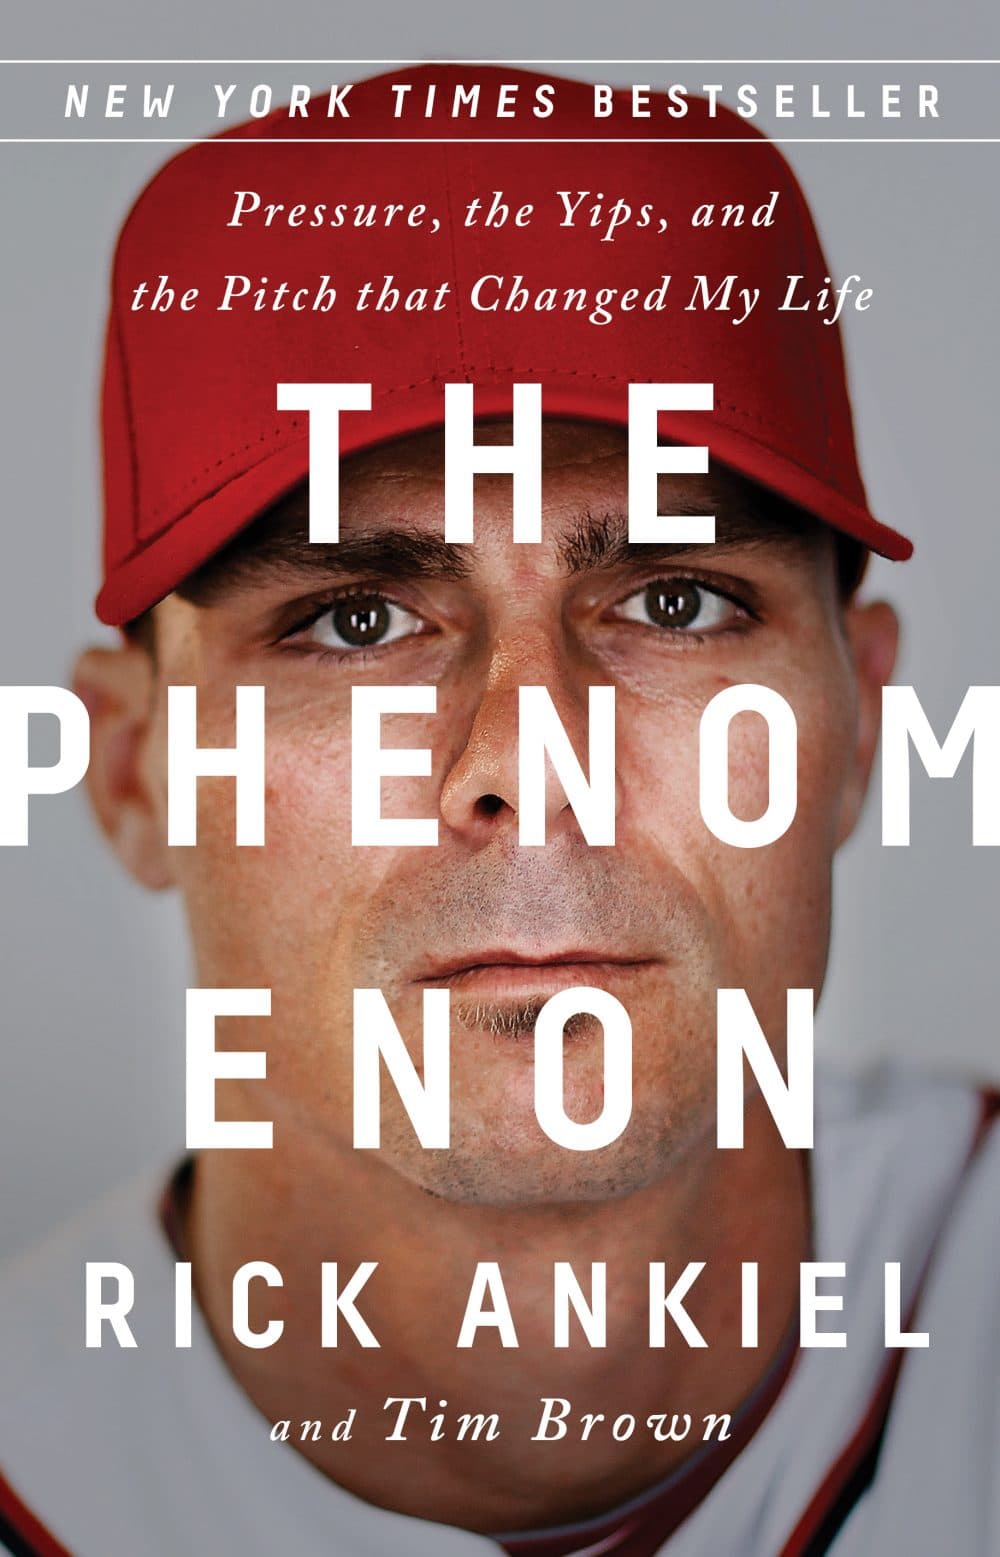 "The Phenomenon: Pressure, the Yips, and the Pitch that Changed My Life," by Rick Ankiel.